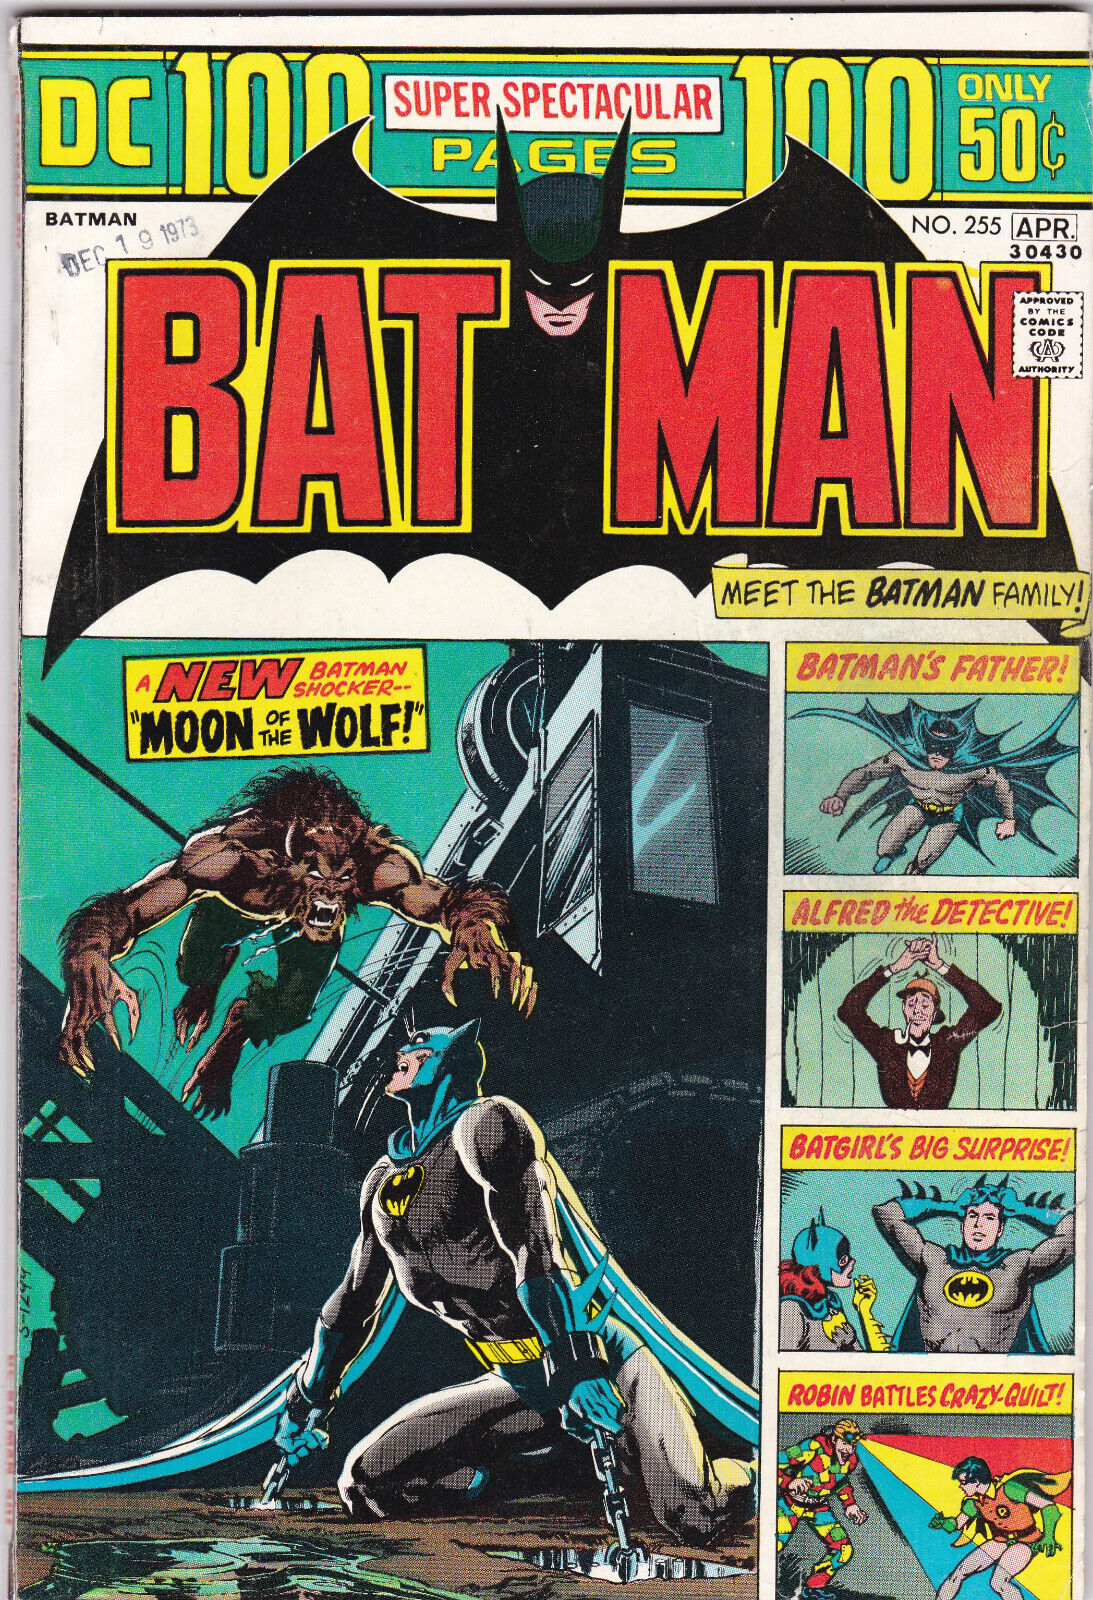 BATMAN #255 8.0 VF 100 PAGE GIANT NEAL ADAMS COVER & ART 1ST ANTHONY LUPUS 1974